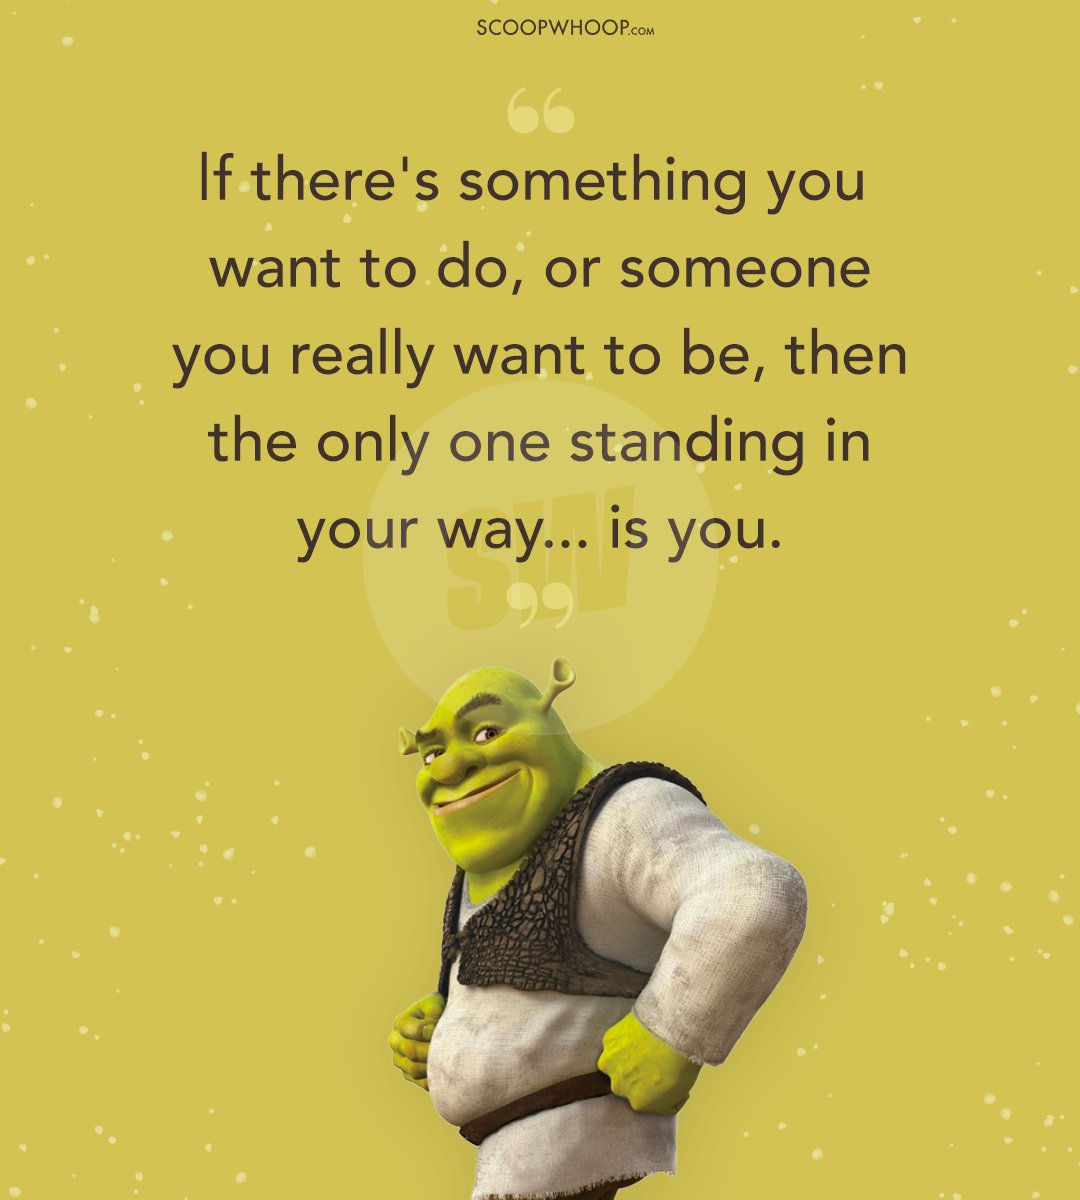 20 Years Later, These 'Shrek' Quotes Are Still The Perfect Dose Of